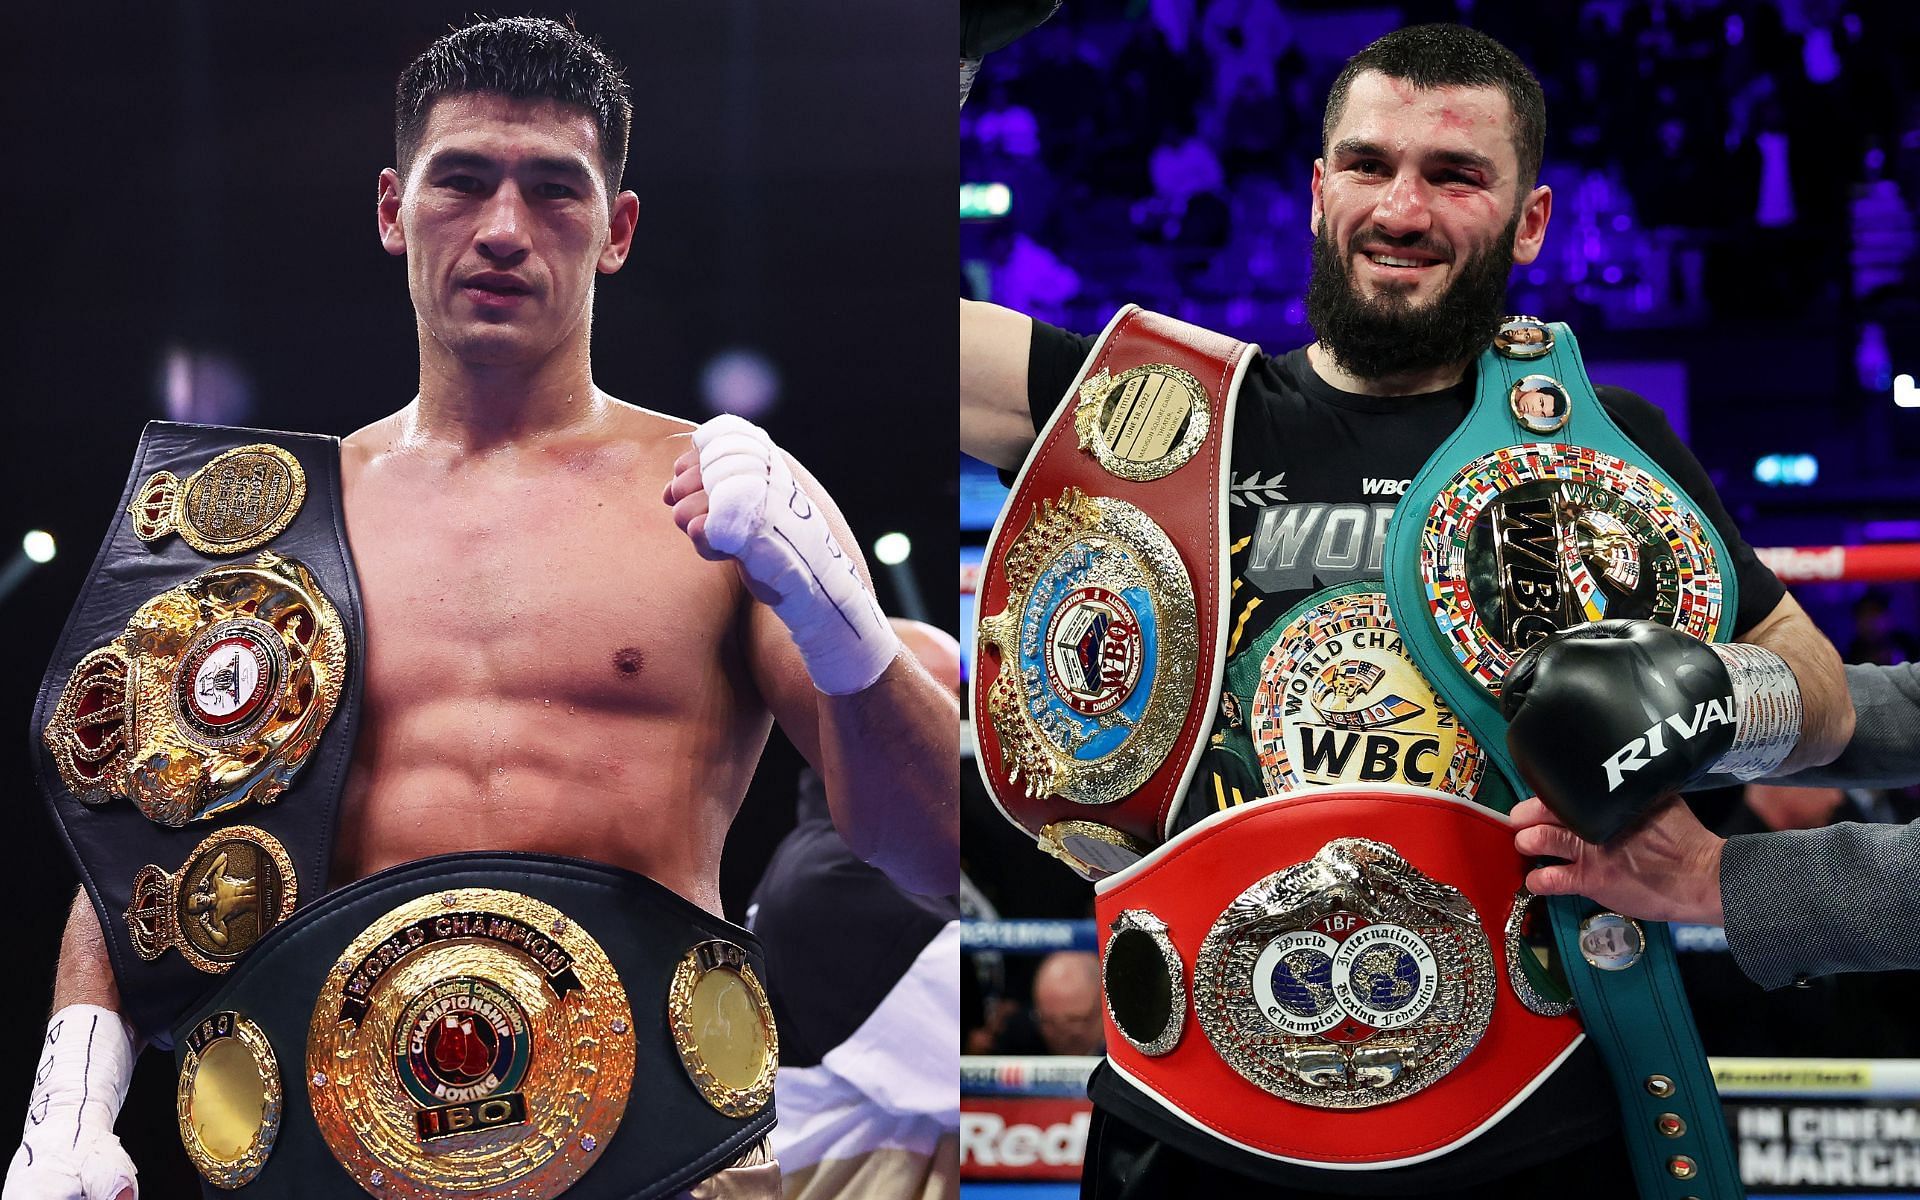 Dmitry Bivol (left) and Artur Beterbiev (right) [Images courtesy: Getty Images]